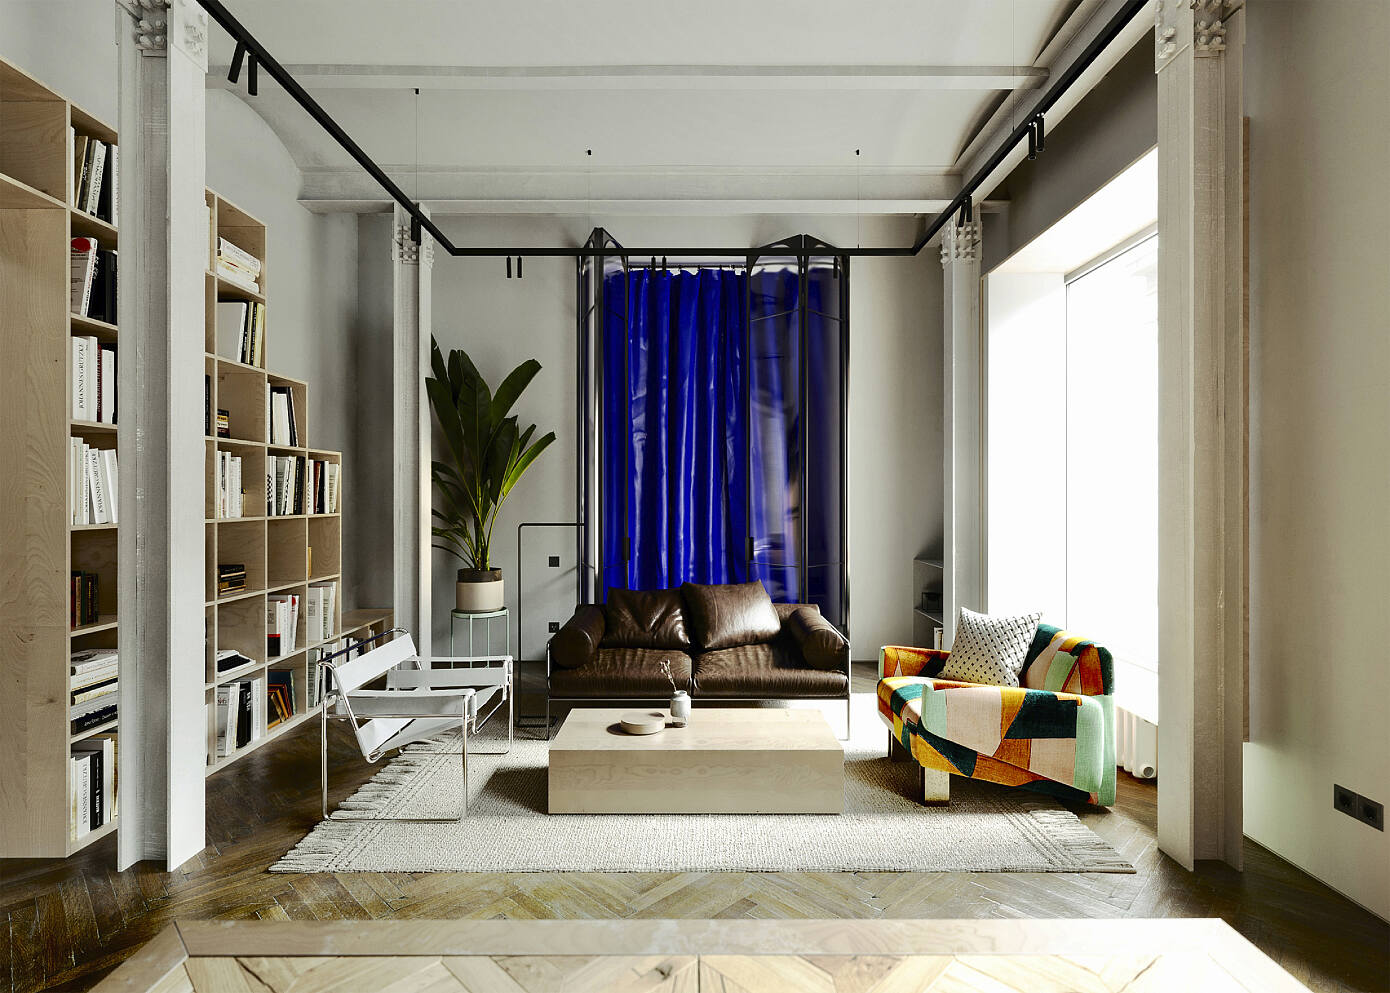 Flat 1 by Unnamed Studio